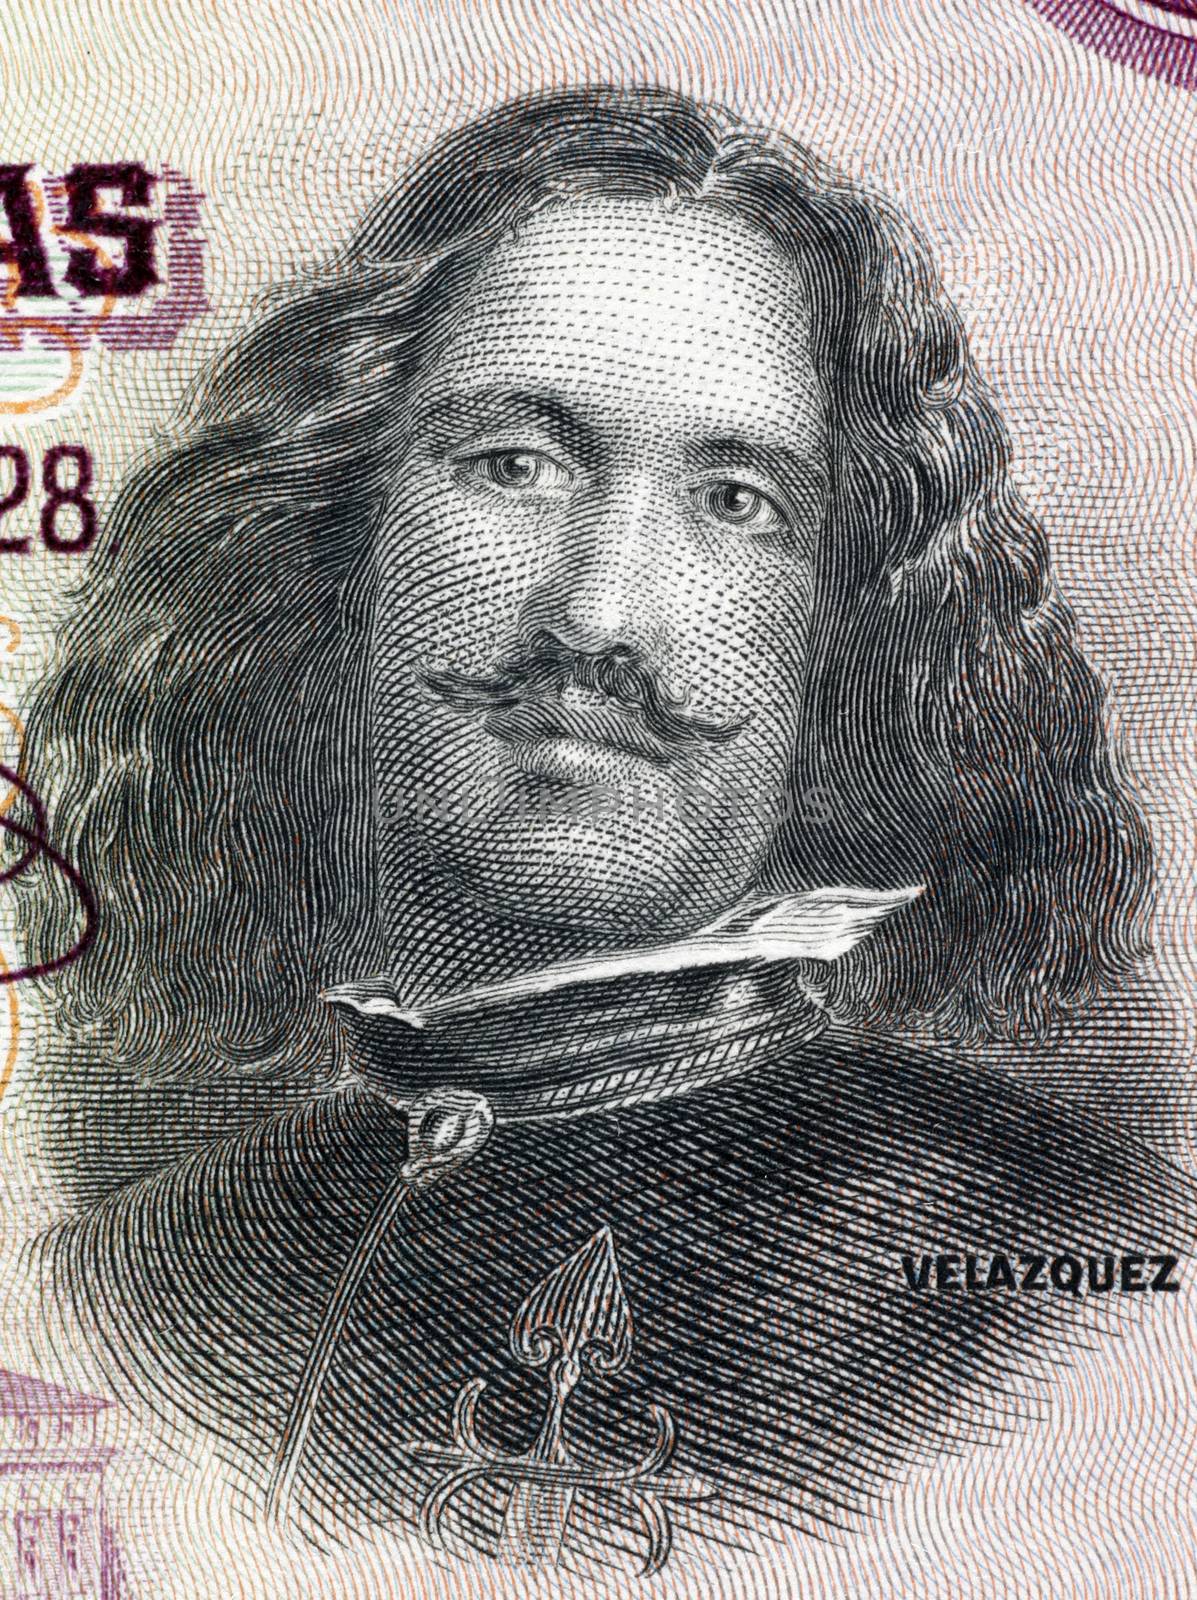 Diego Velazquez (1599-1660) on 50 Pesetas 1928 Banknote from Spain. Spanish painter.